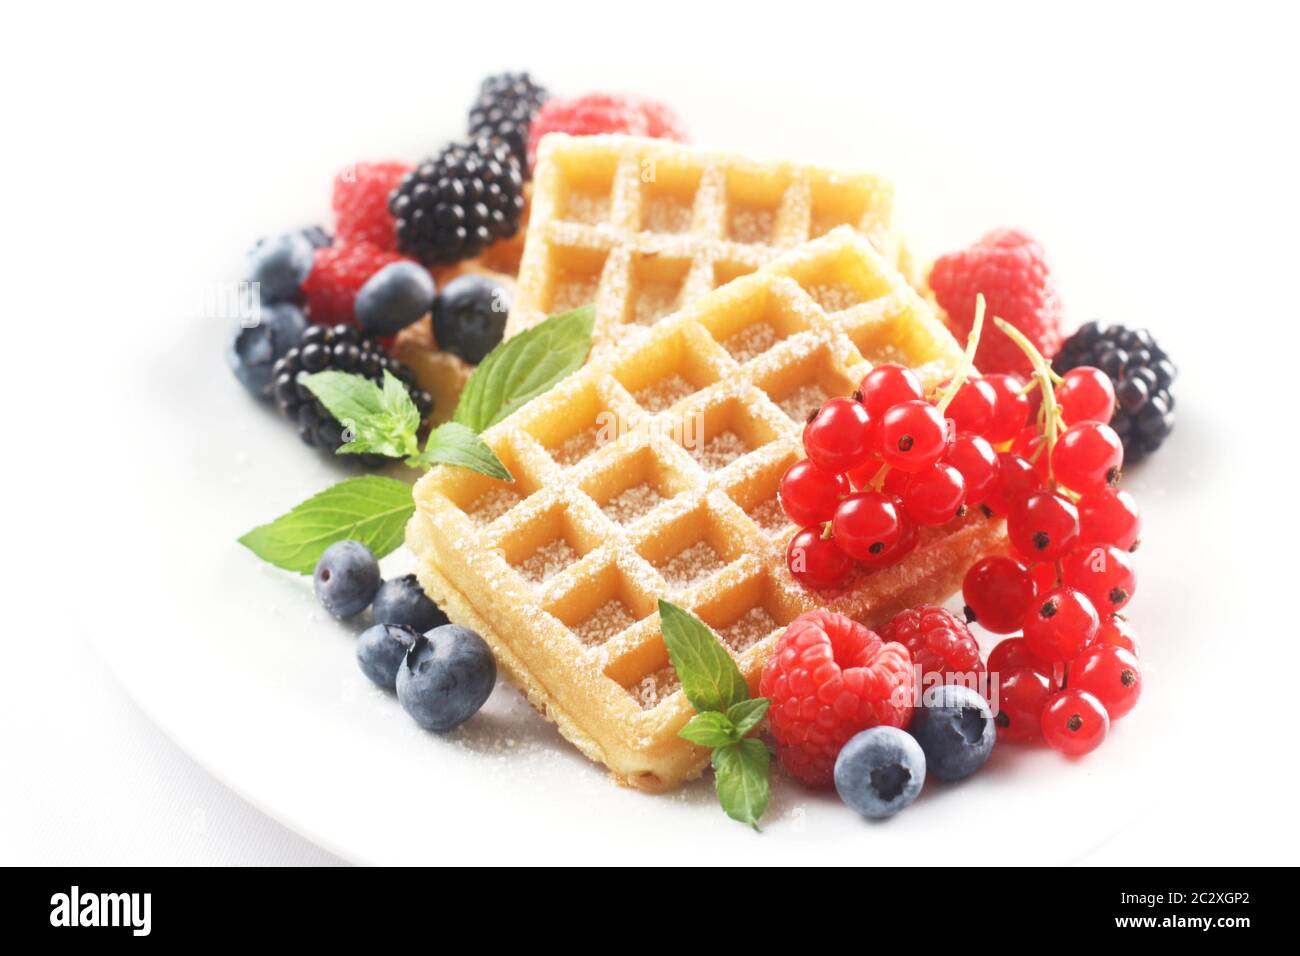 Waffles with Mixed Berries Stock Photo